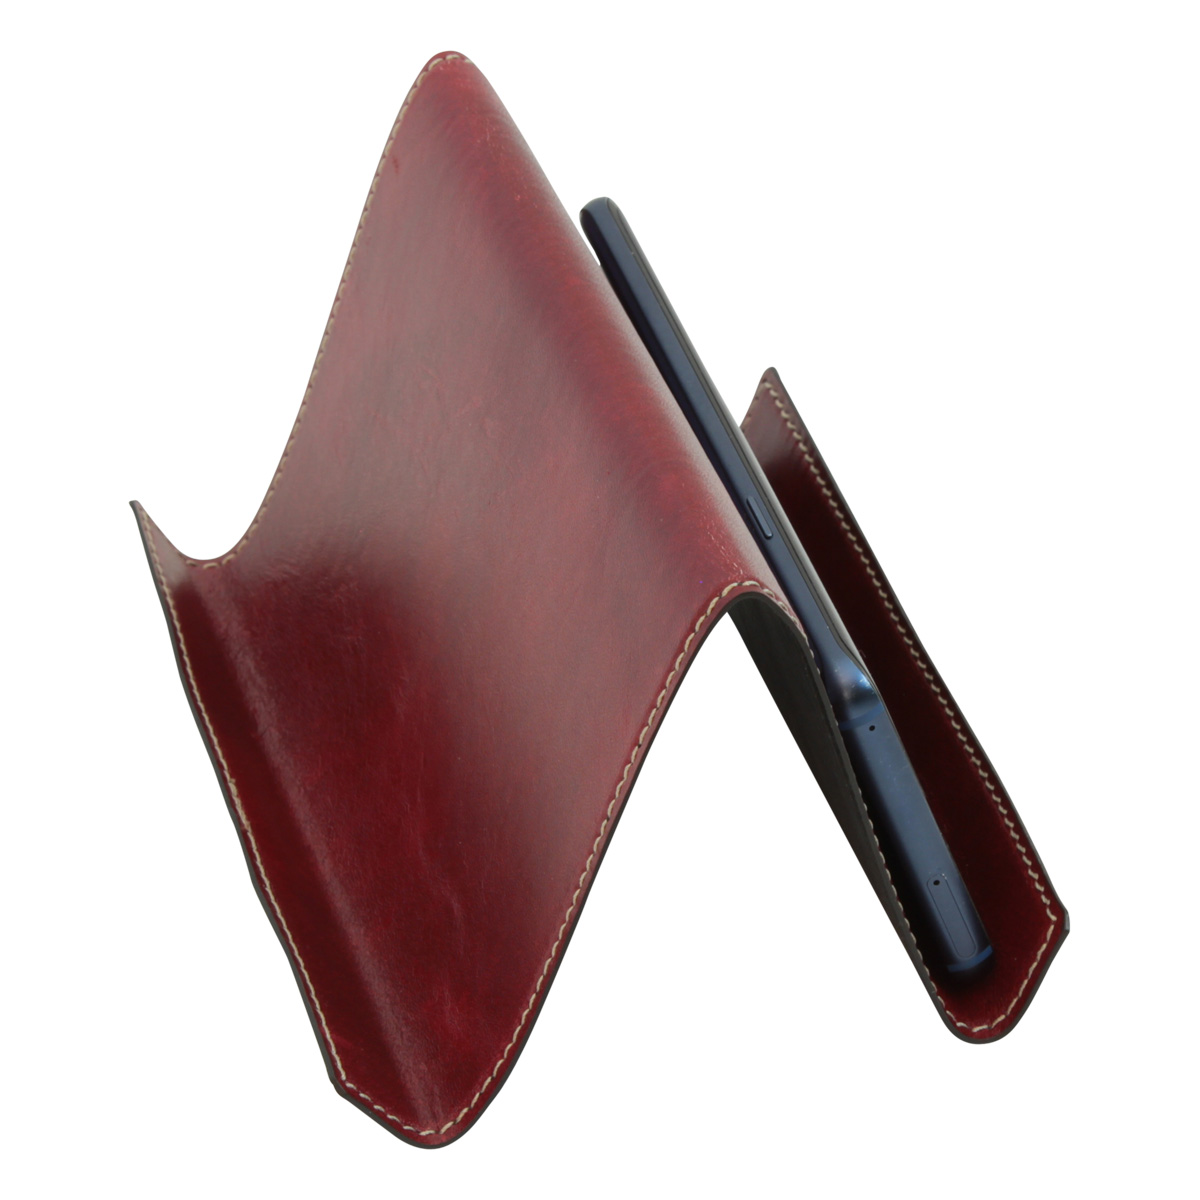 Leather ipad and iphone stand - red | 764089RO US | Old Angler Firenze